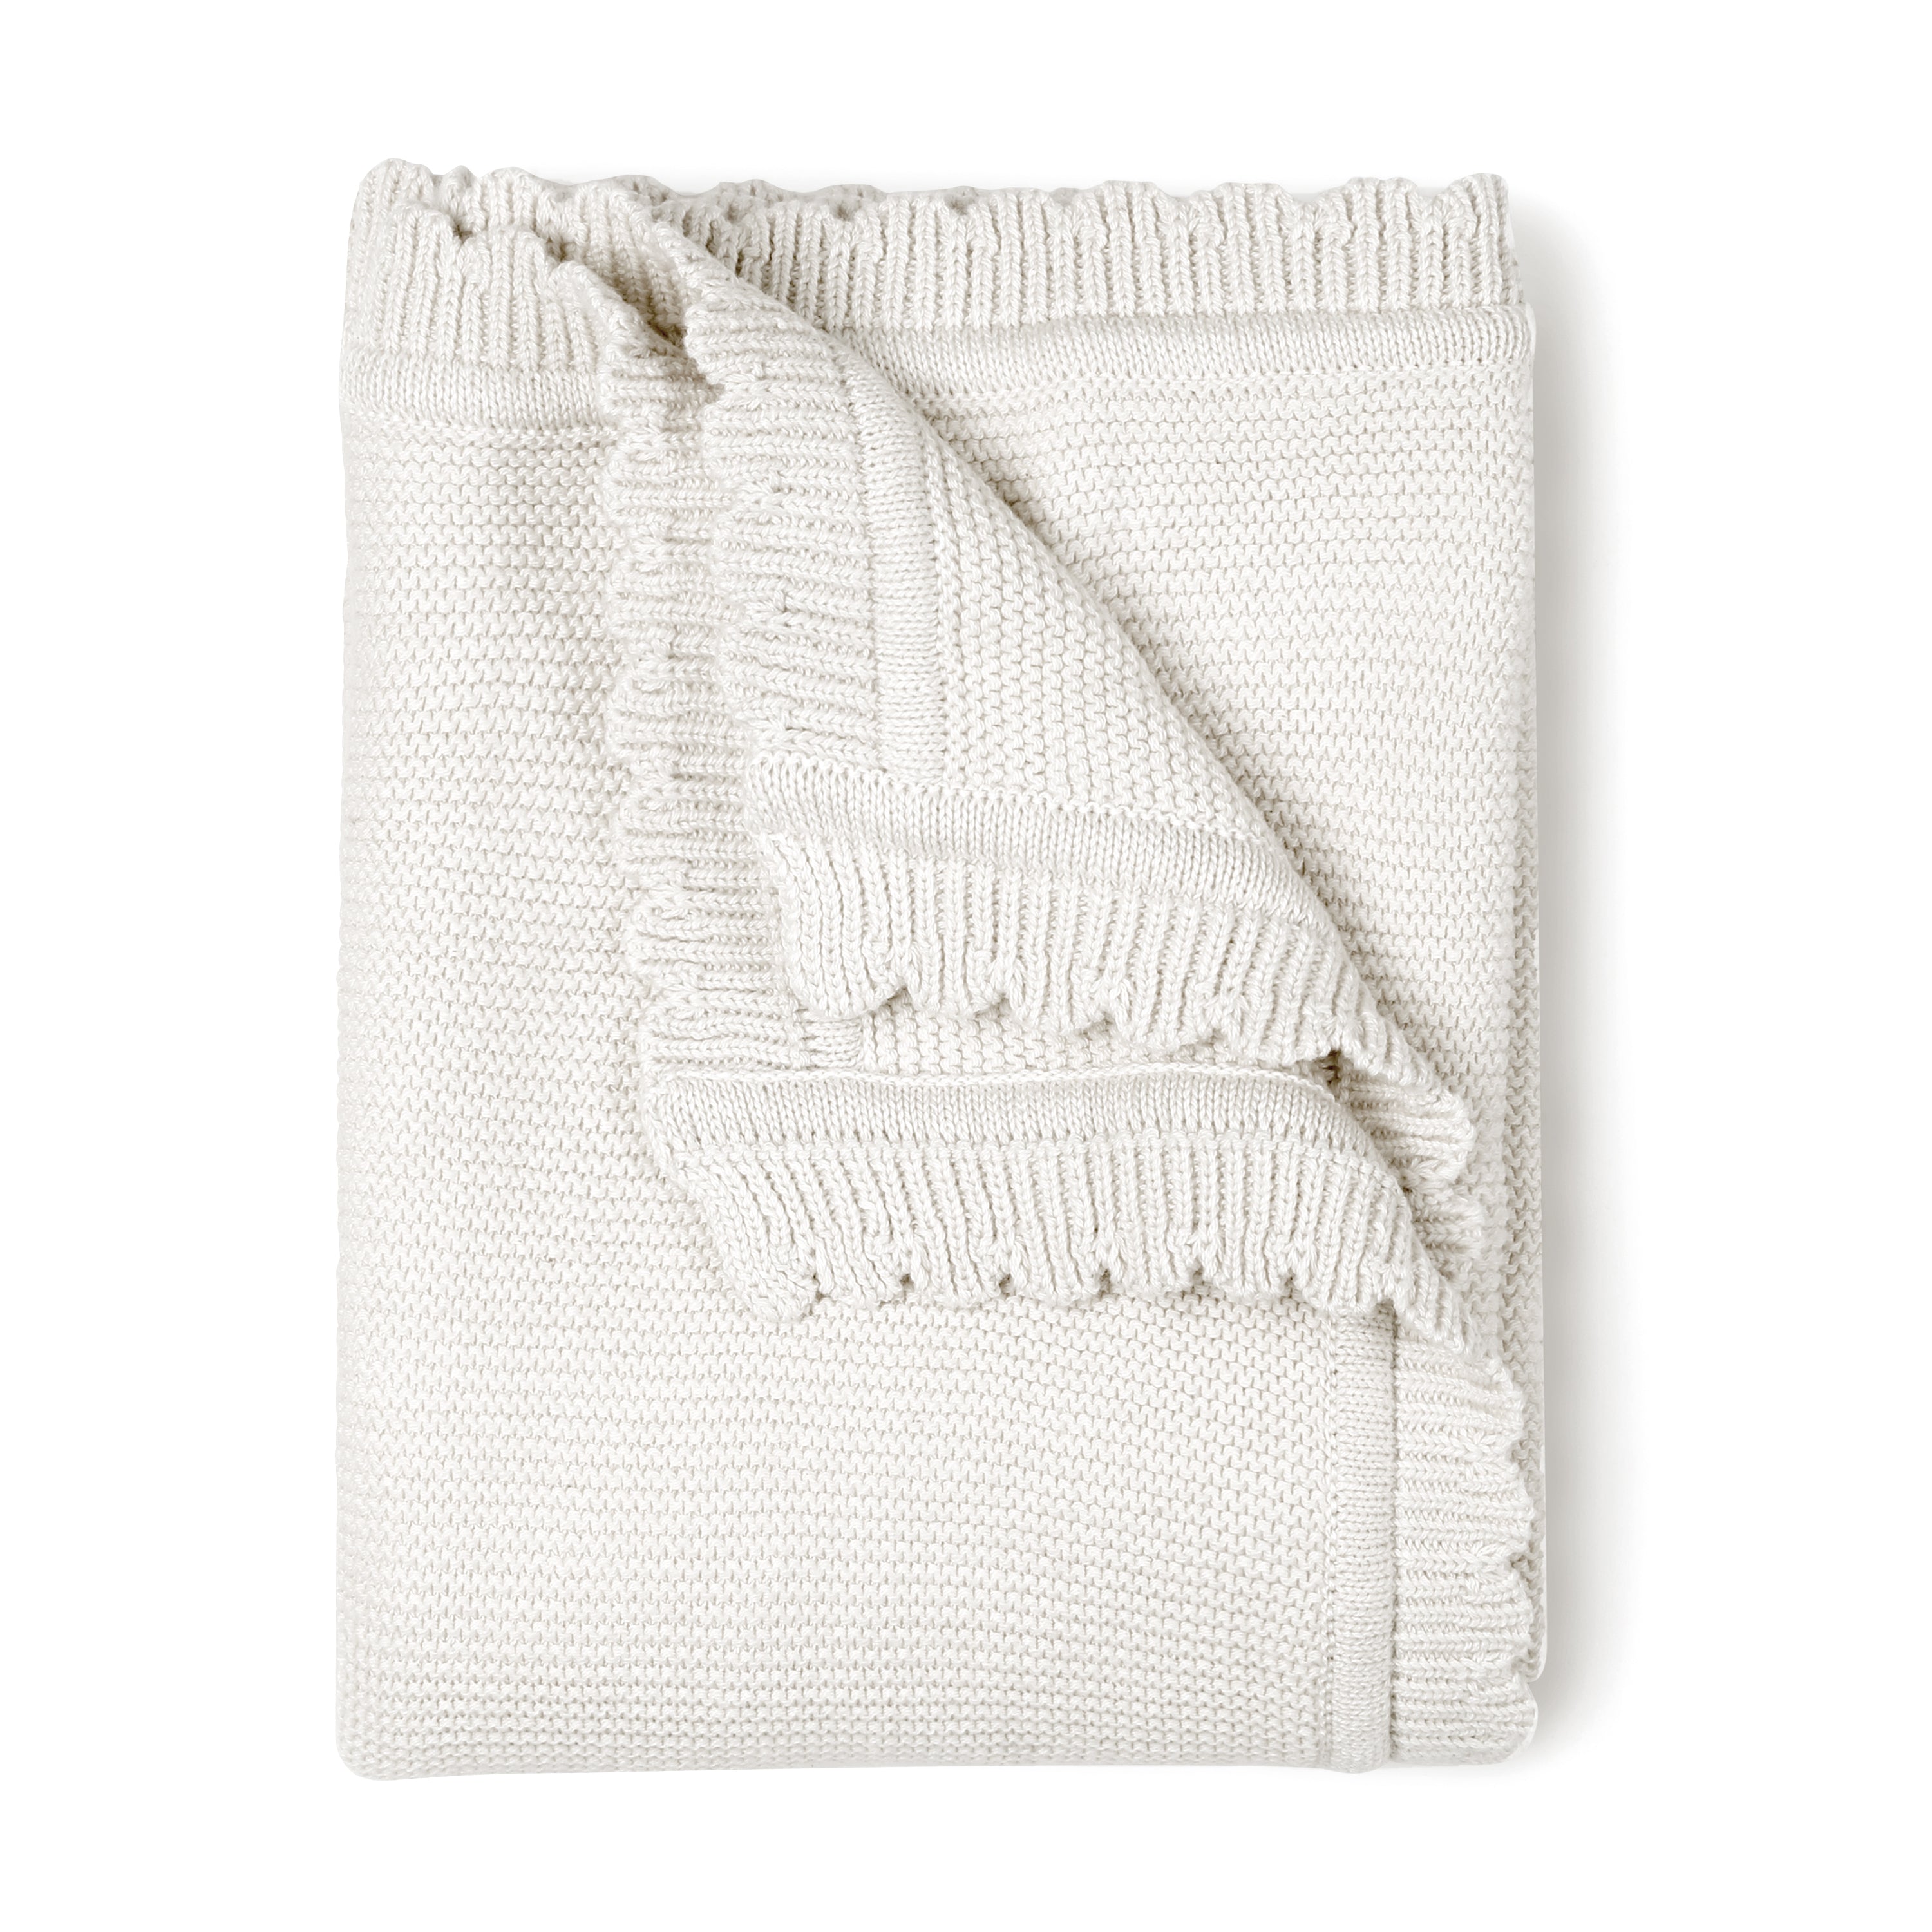 A neatly folded Ella Ivory Organic Cotton Scalloped Baby Blanket with a textured pattern, partially unfolded at one corner, isolated on a white background.